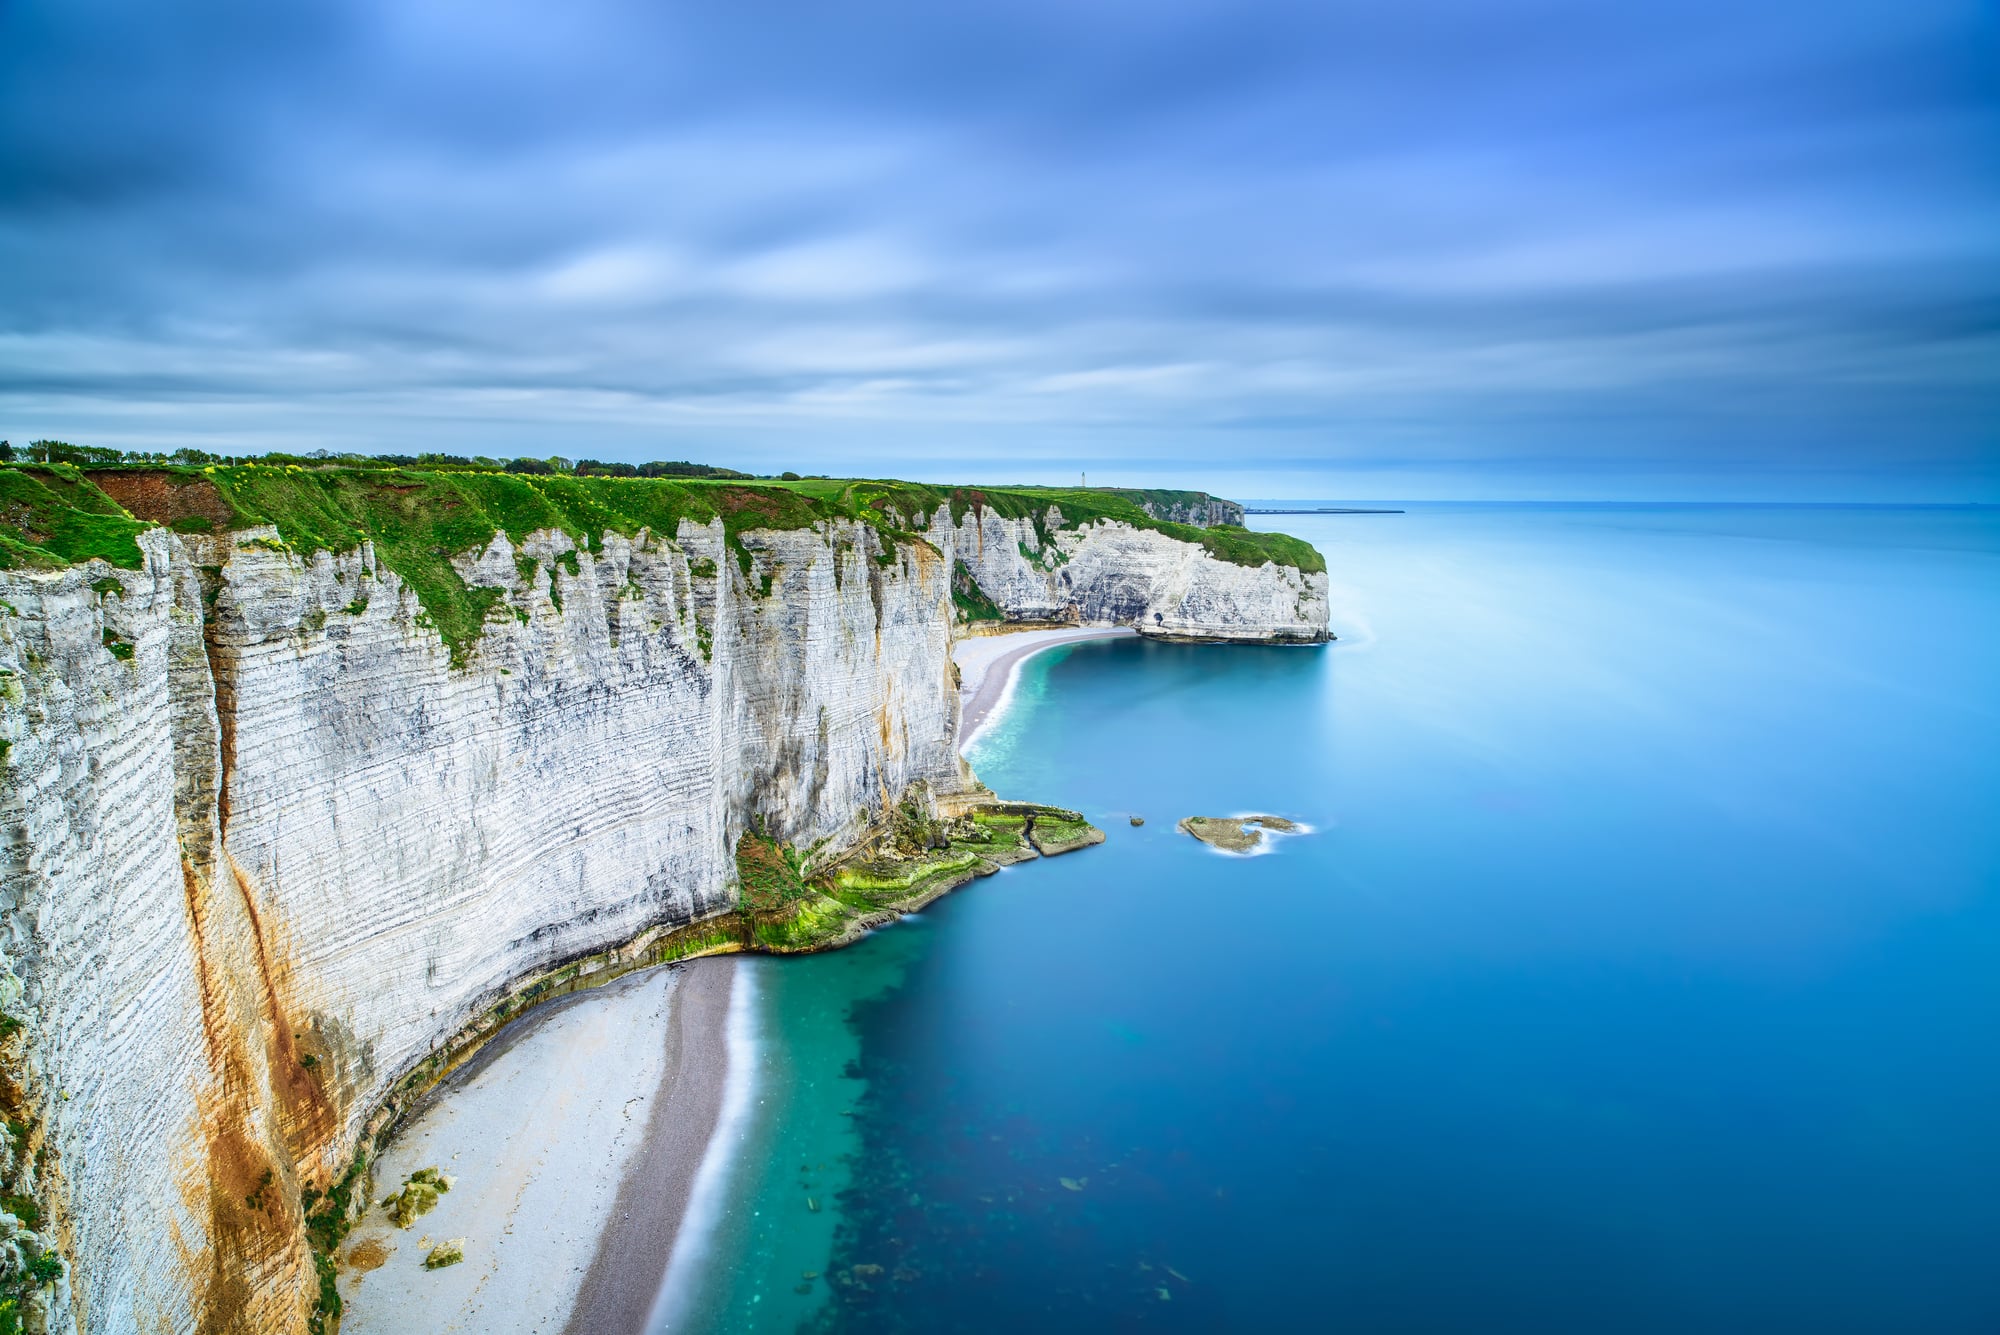 Etretat, rock cliff and beach. Aerial view. Normandy, France